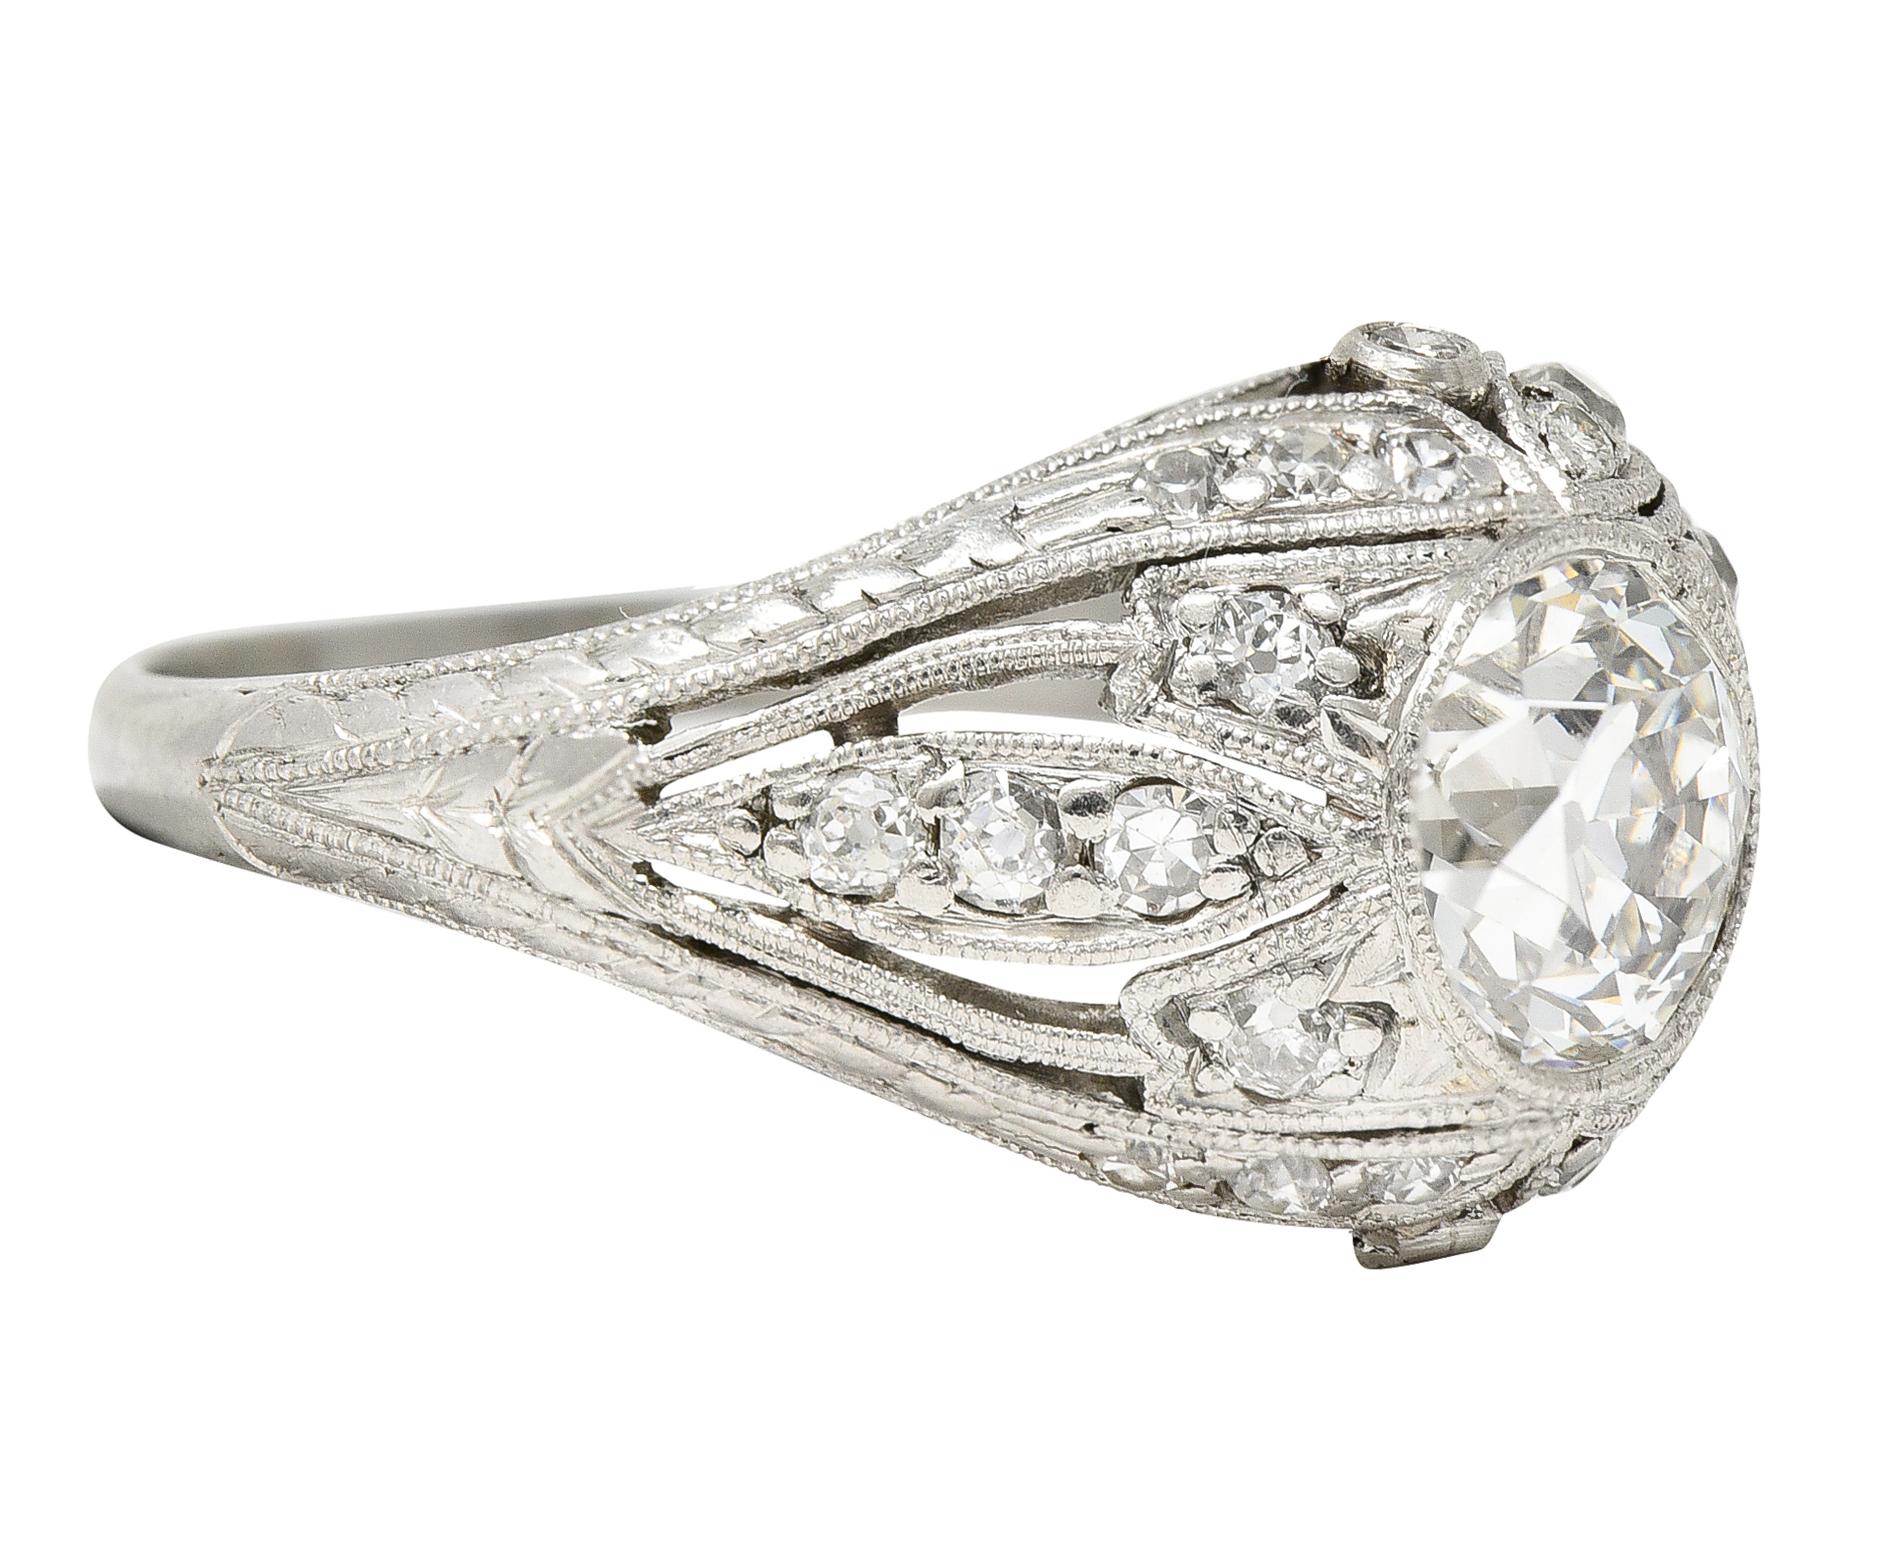 Bombè style ring is pierced in a stylized design with hand engraved foliate. Featuring an old European cut diamond weighing 1.11 carats - I color with VS1 clarity. Bezel set and surrounded by single and old European cut diamond accents. Weighing